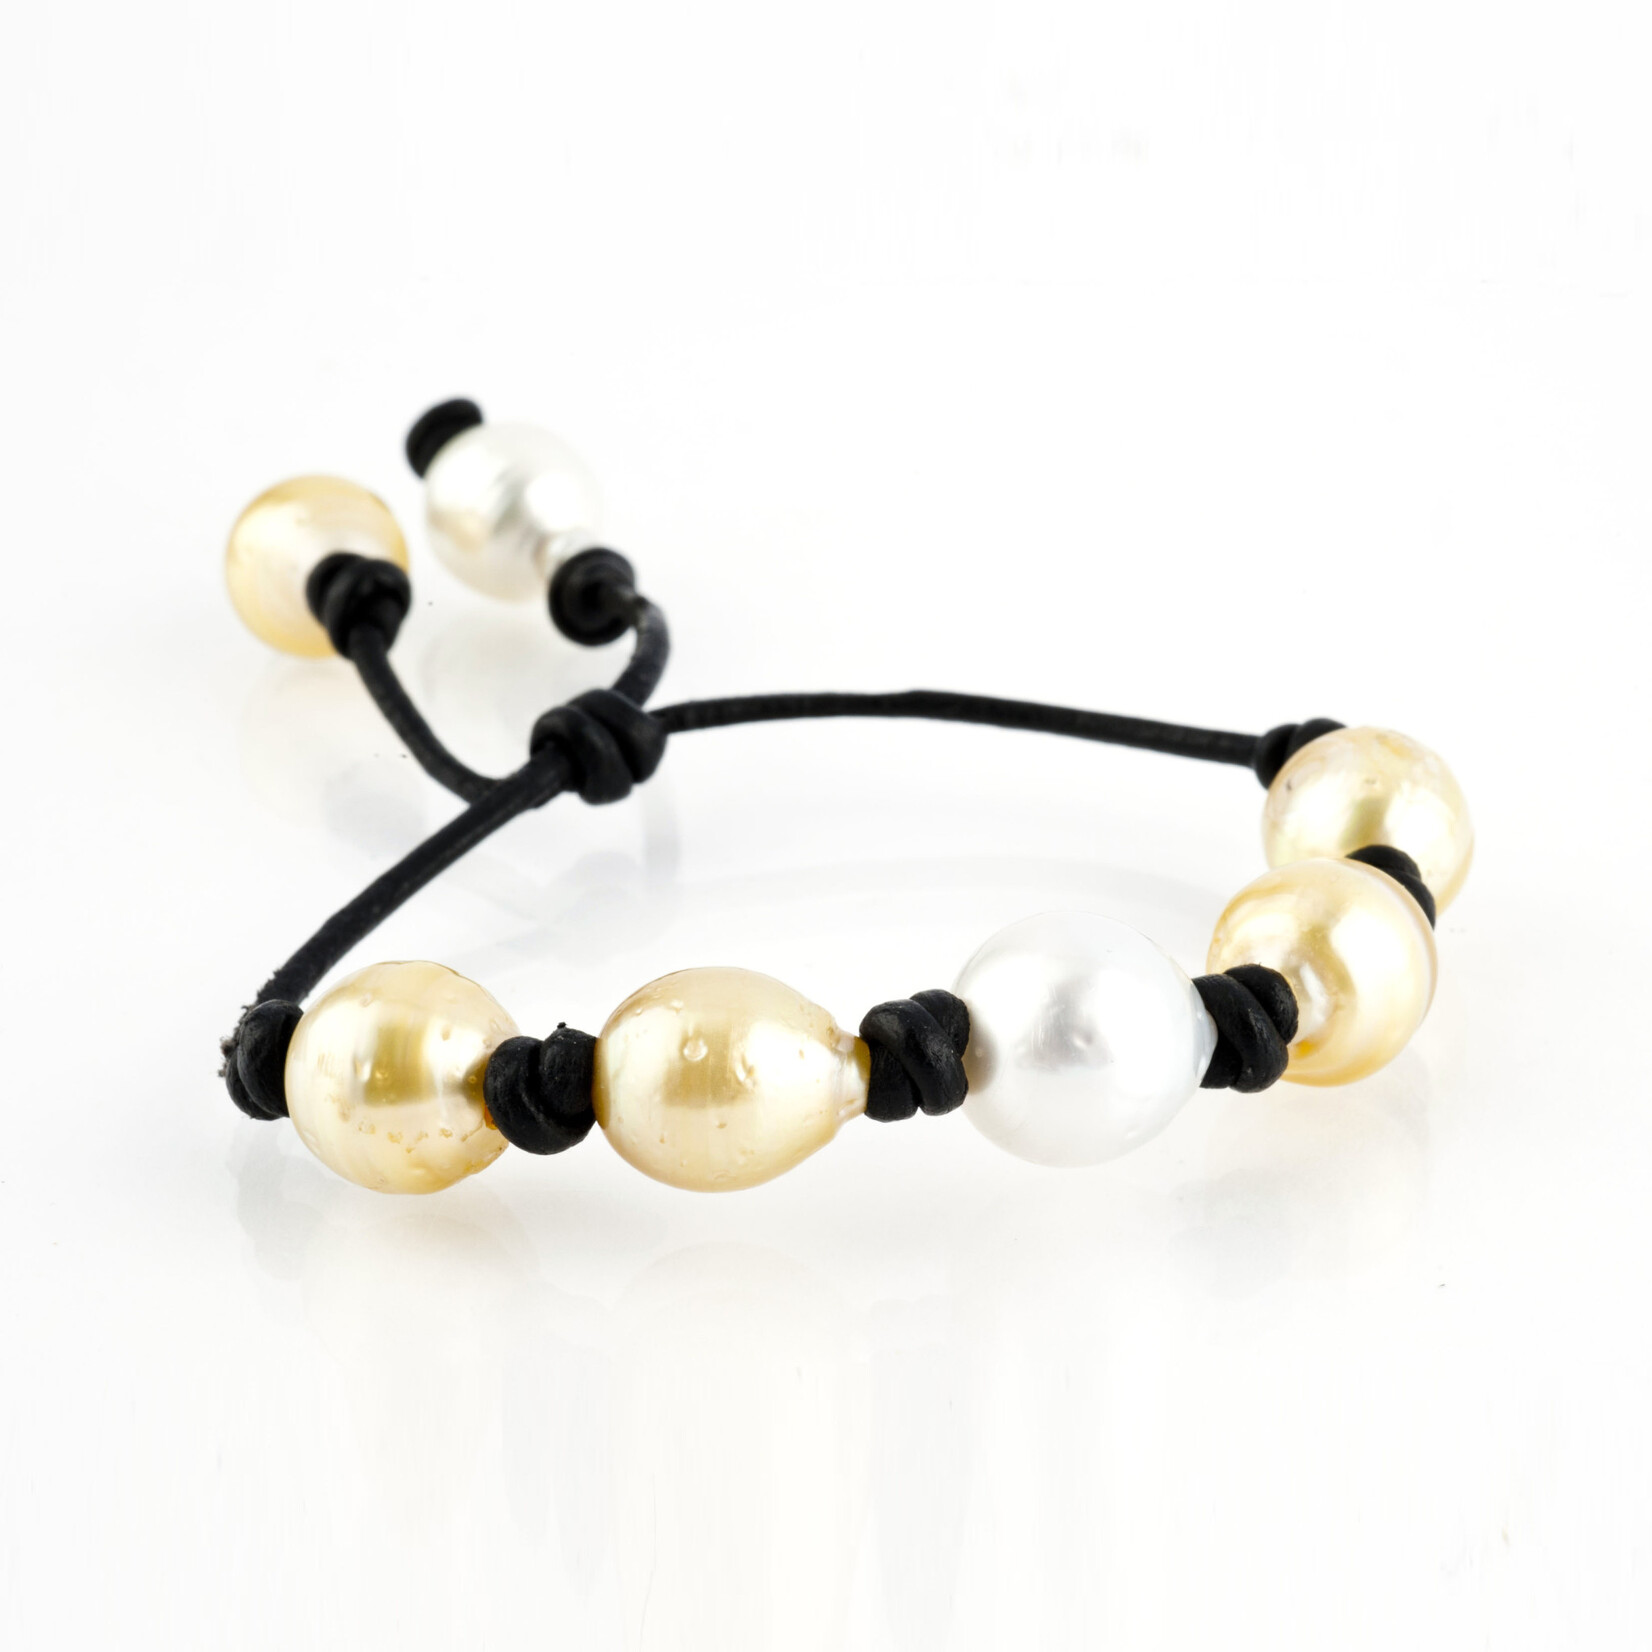 Mina Danielle Yellow and White South Sea and Tahitian Pearl Bracelet on Black Leather Cord with adjustable sliding closure.